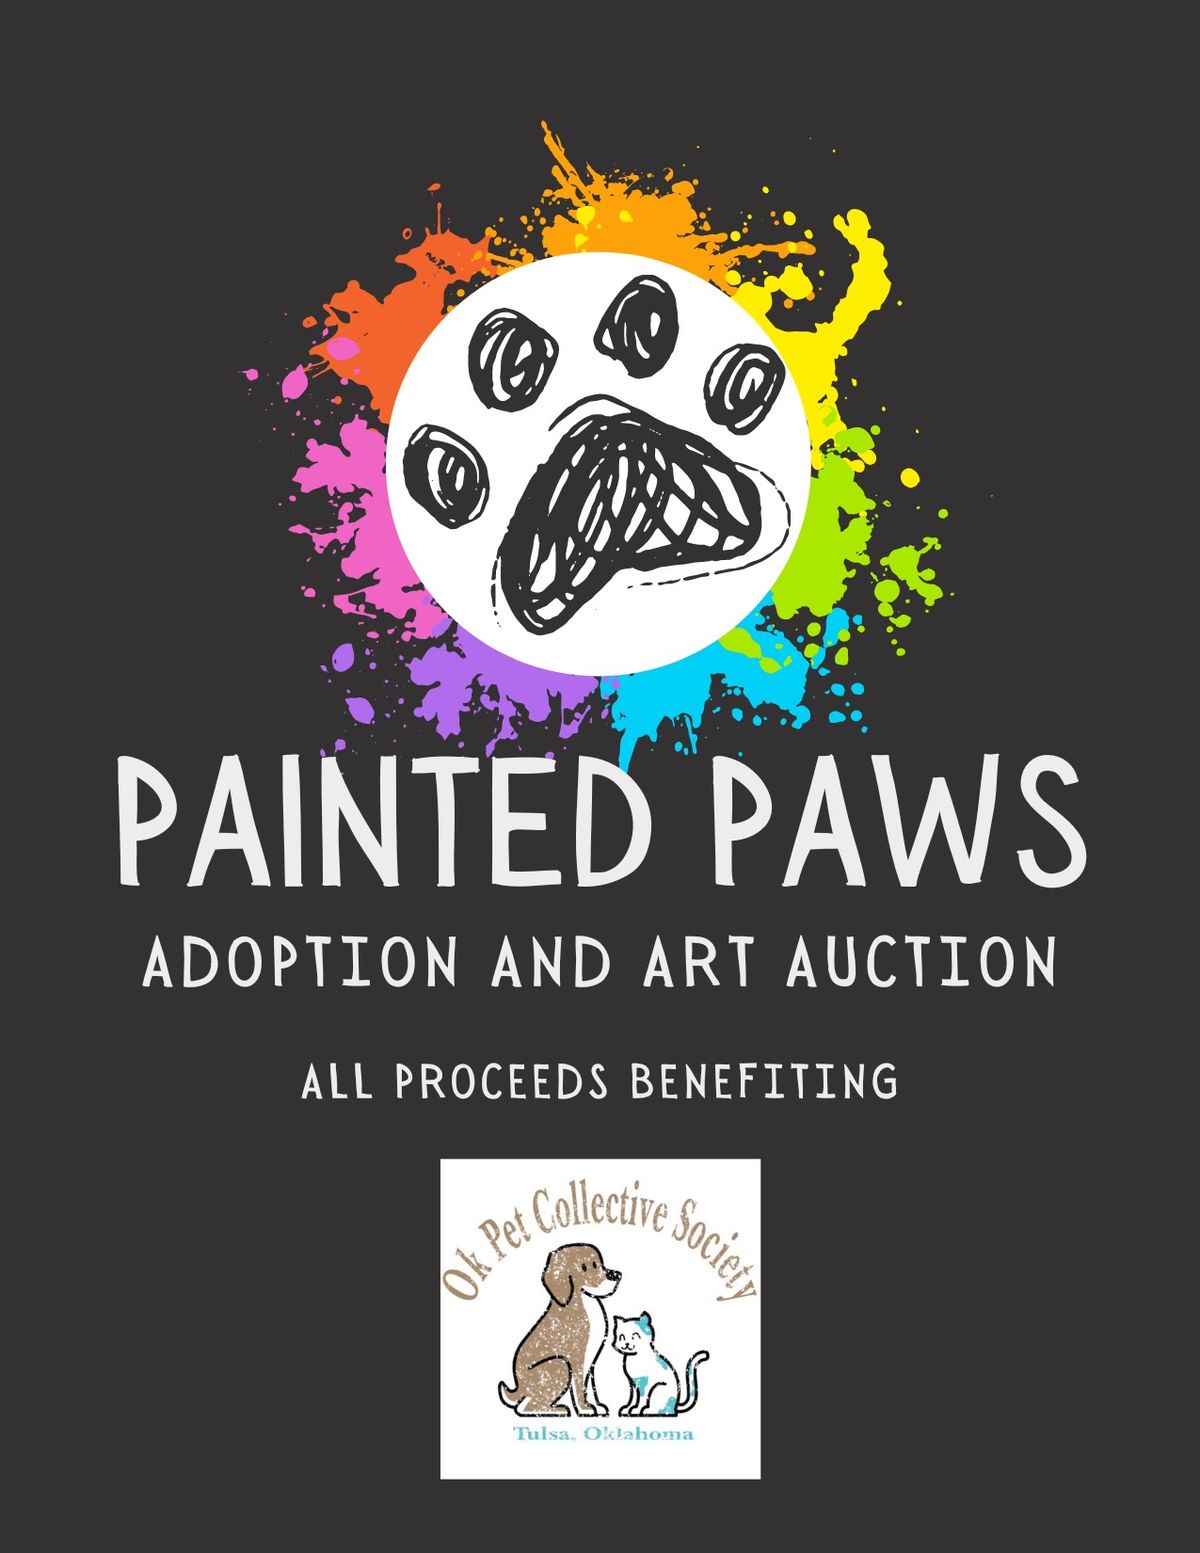 Painted Paws : Animal Adoptions and Art Auction